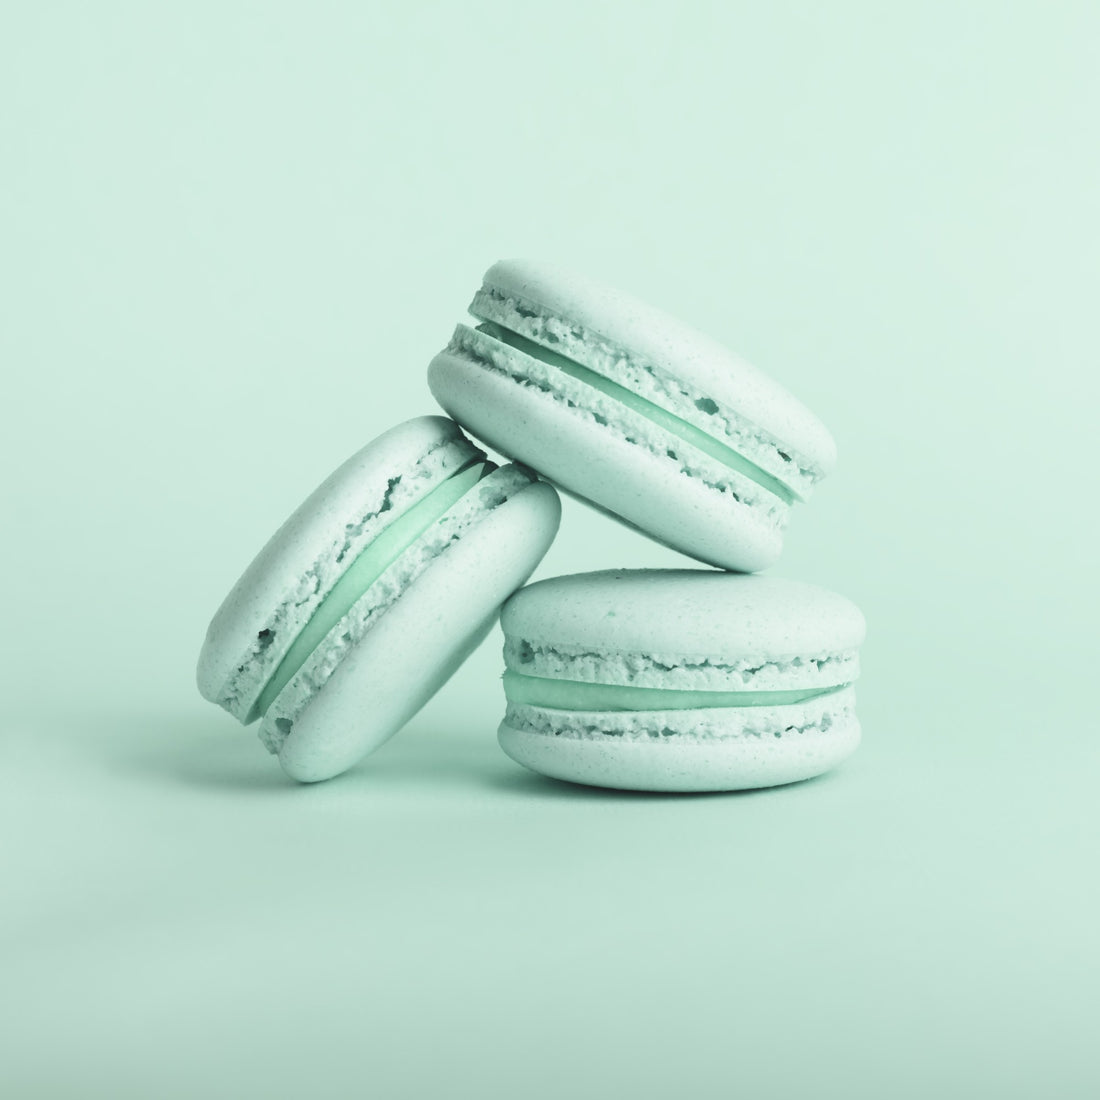 perfect macarons shape and texture